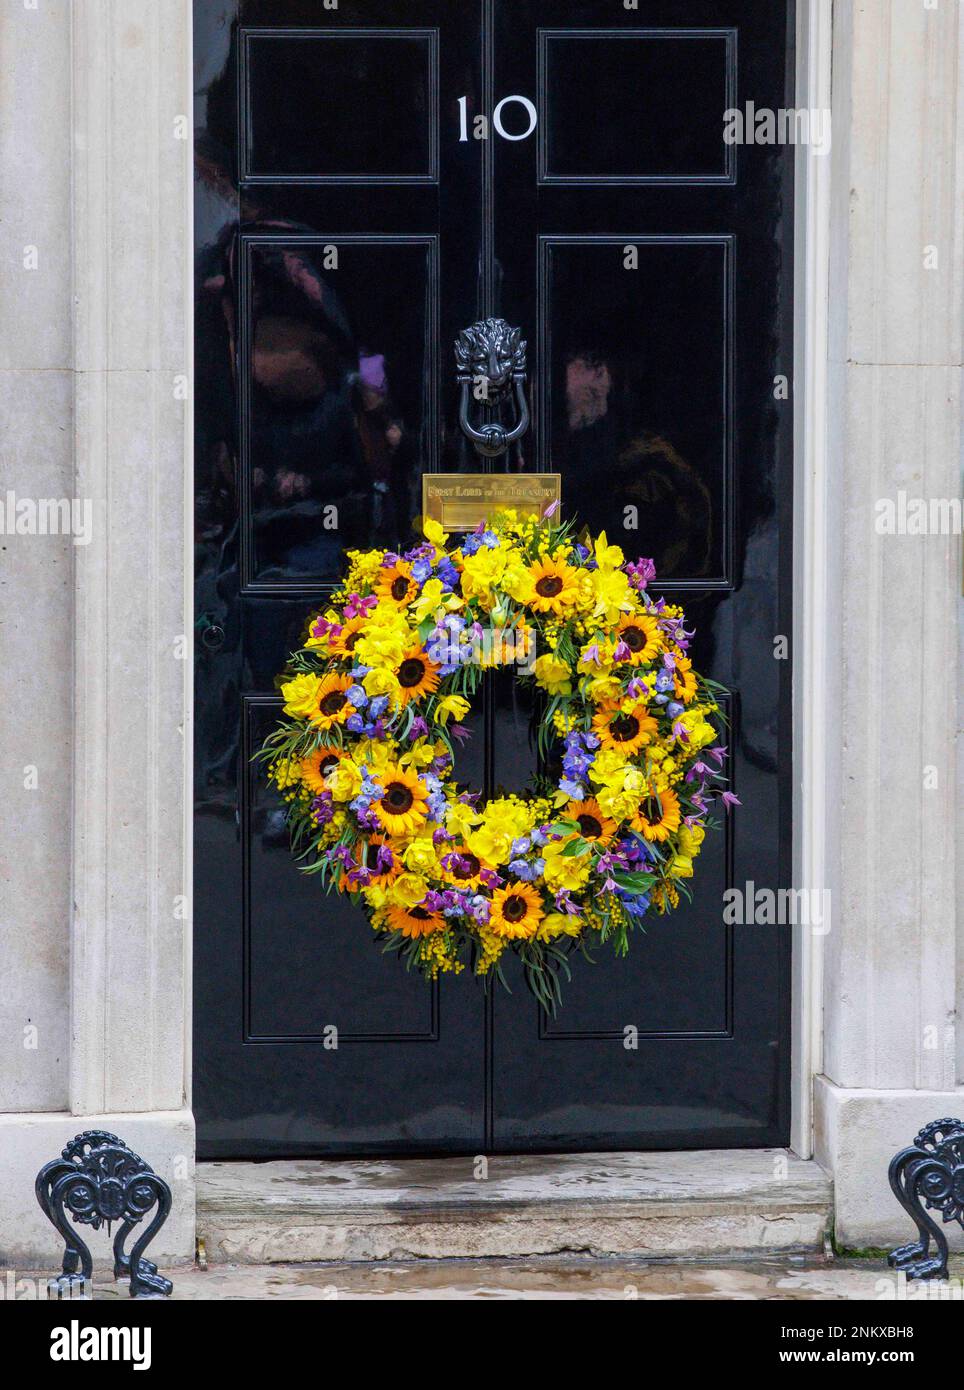 London, UK. 24th Feb, 2023. Ukraine wreath on the door of Number 10 The Prime Minister, Rishi Sunak, observes a minuteÕs silence with his wife Akshata Murty to mark the one-year anniversary of the full-scale Russian invasion of Ukraine. The Prime Minister is joined in front of the Downing Street door by the Ukrainian Ambassador to the UK, Vadym Prystaiko with his wife, members of the Ukrainian Armed Forces and representatives from each Interflex nation. After the minutes silence, The Ukrainian National anthem was sung. Credit: Mark Thomas/Alamy Live News Stock Photo